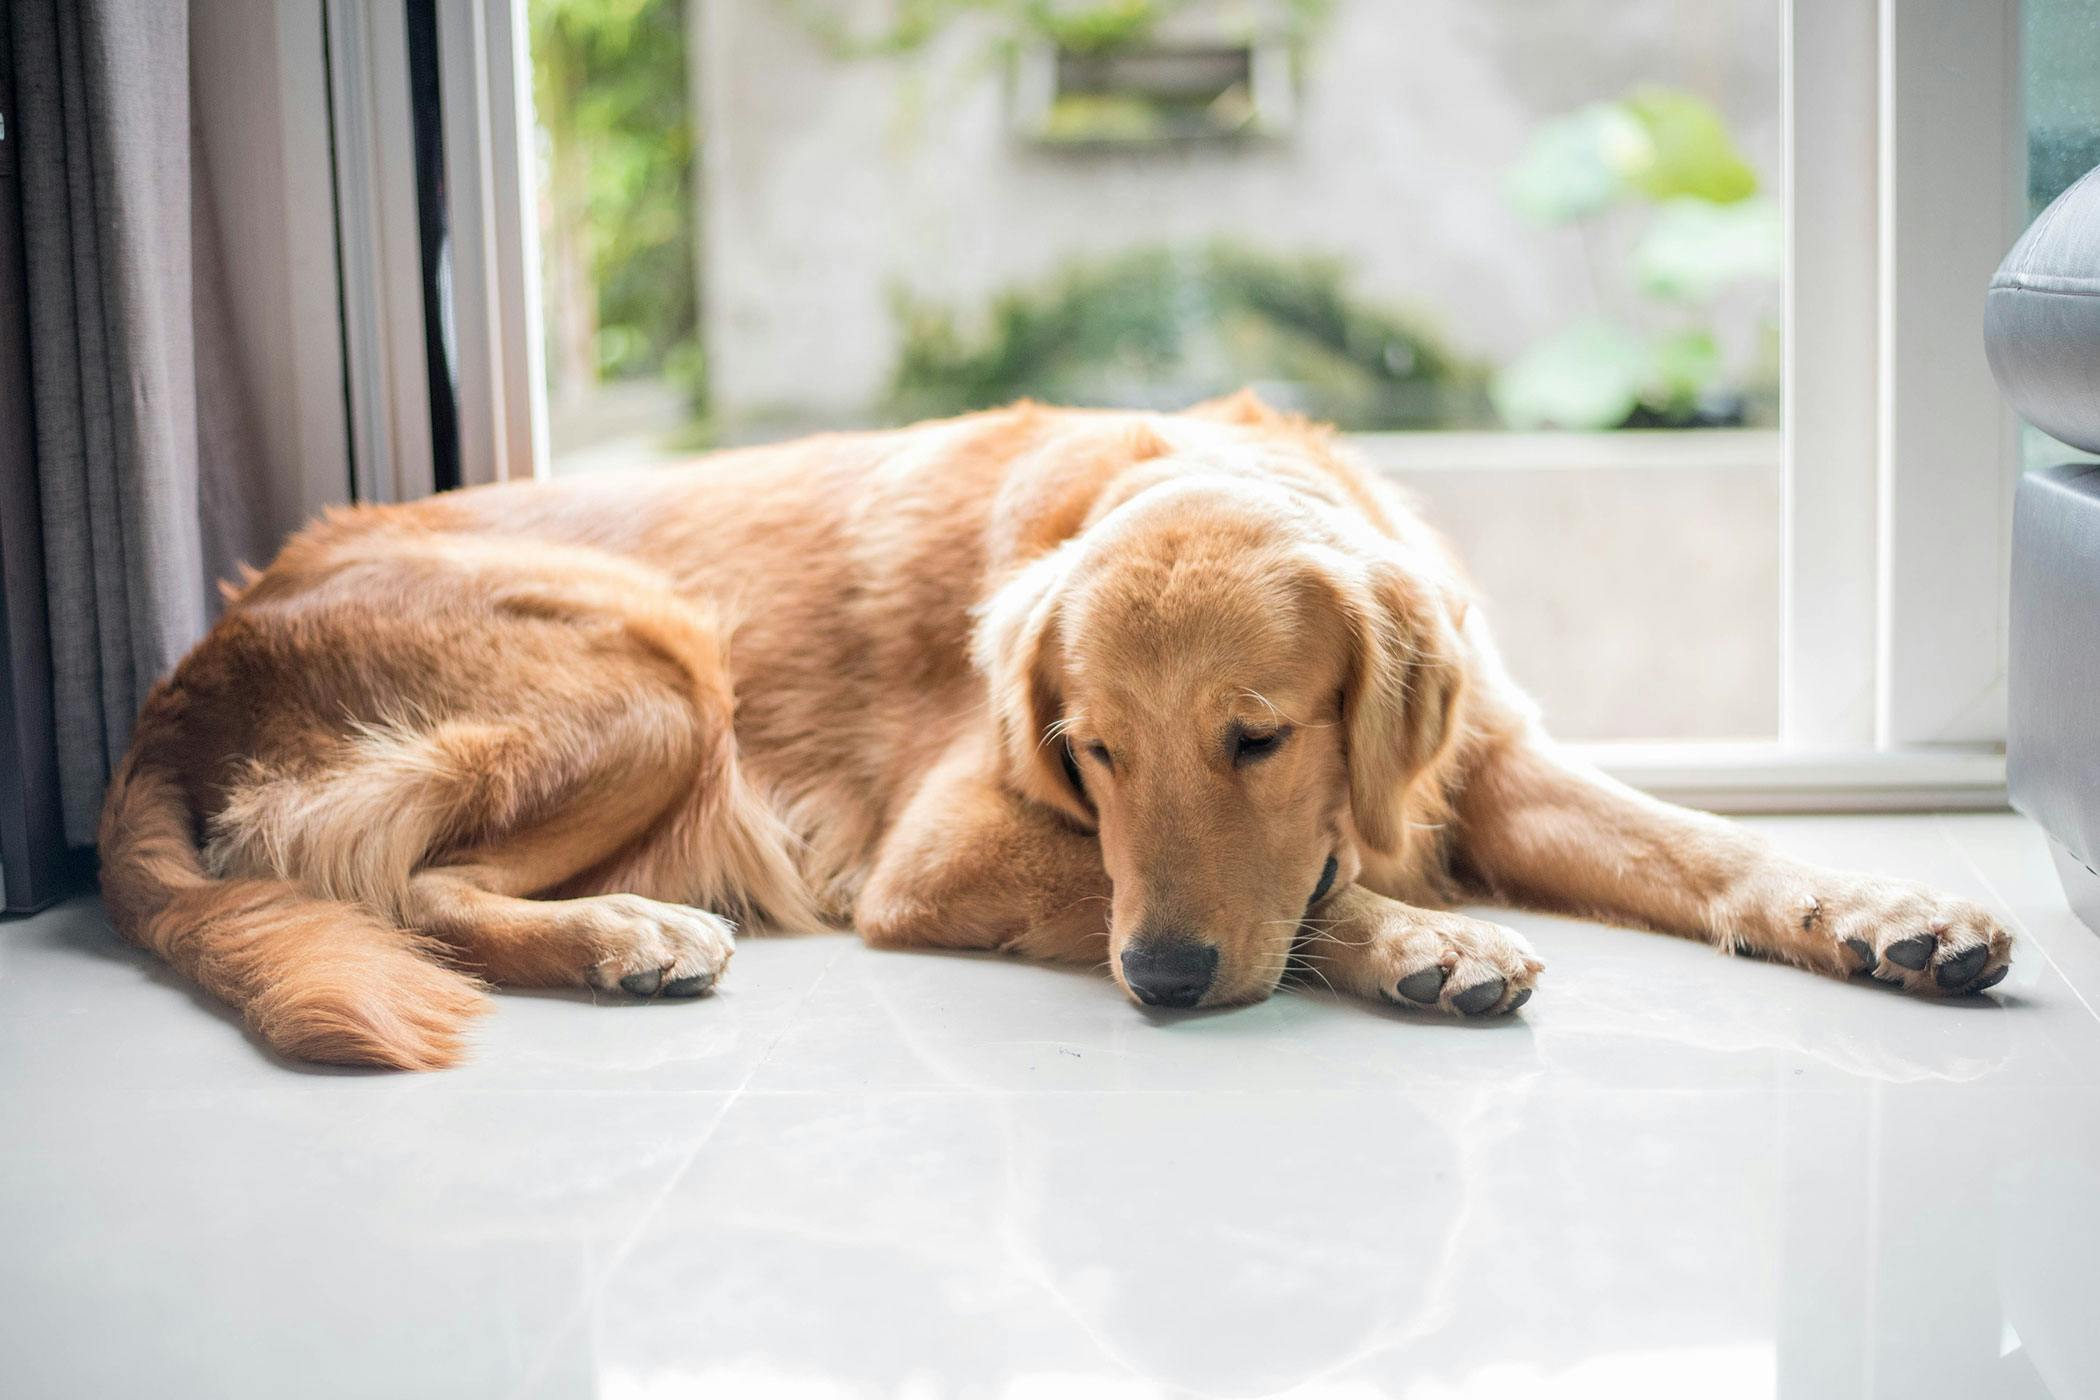 why is the tsh high in dogs who have hypothyroidism